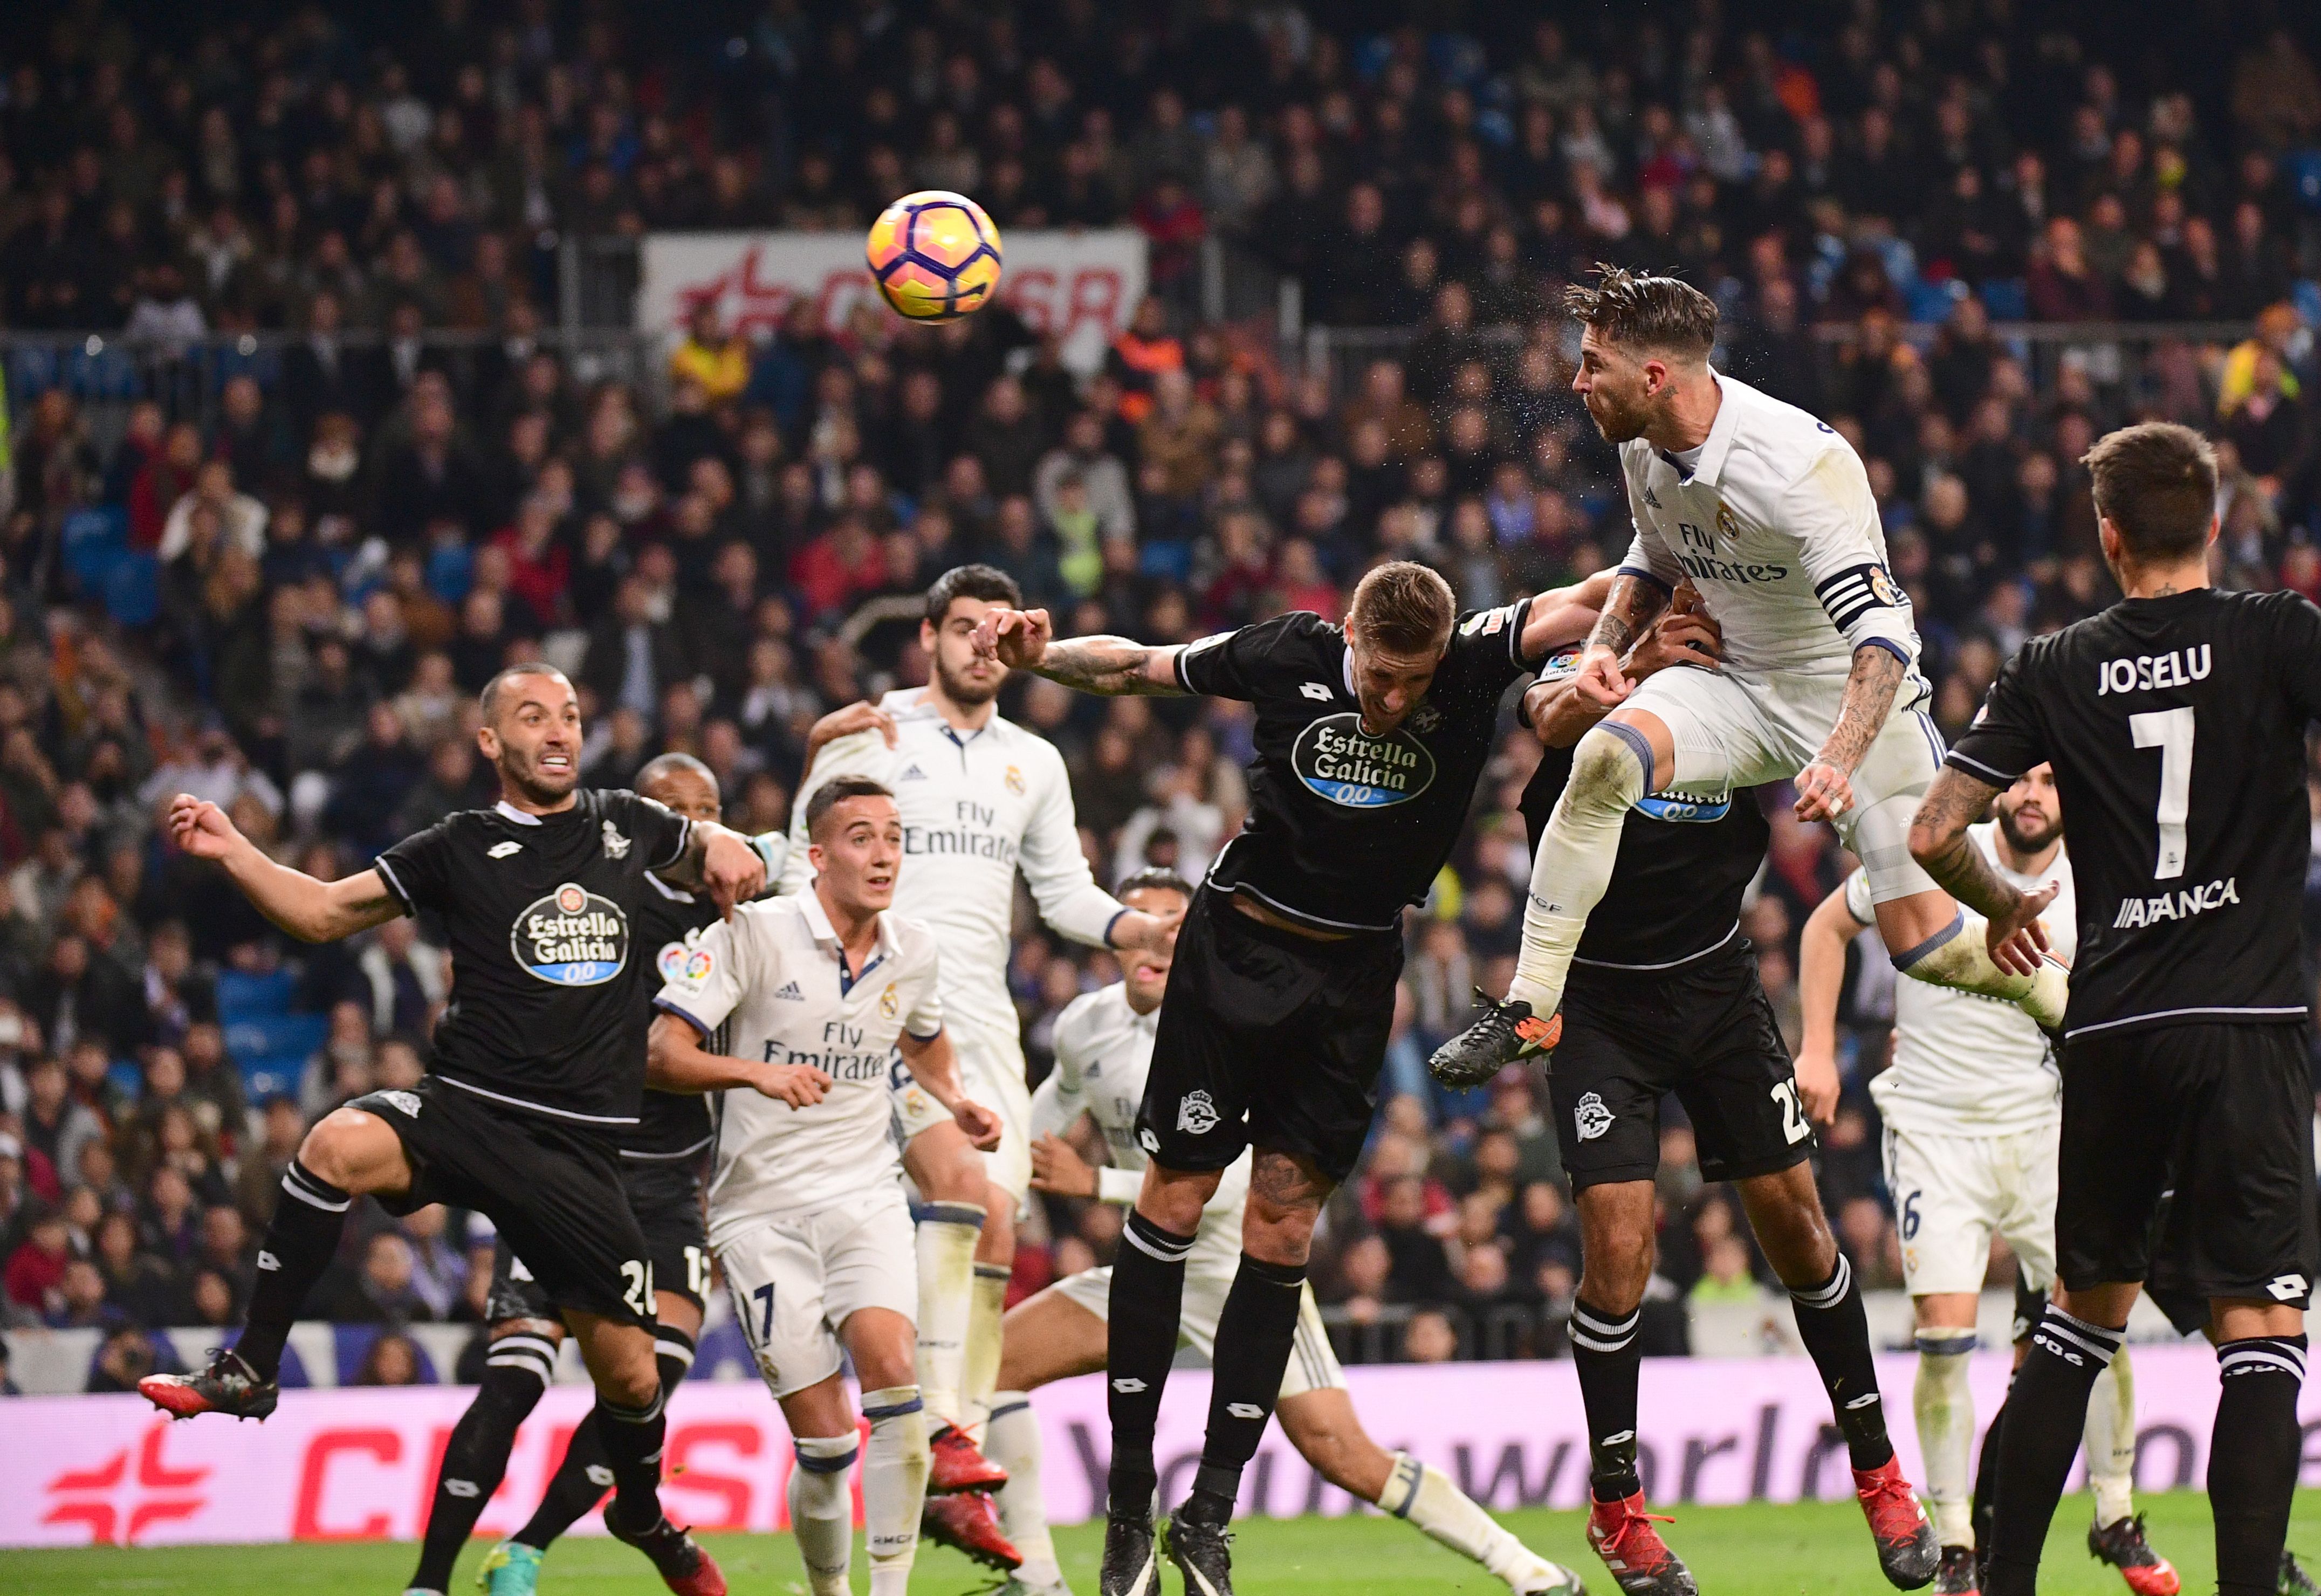 Real Madrid's defender Sergio Ramos (R) heads the ball to score during the Spanish league football match Real Madrid CF vs RC Deportivo at the Santiago Bernabeu stadium in Madrid on December 10, 2016. / AFP / PIERRE-PHILIPPE MARCOU        (Photo credit should read PIERRE-PHILIPPE MARCOU/AFP/Getty Images)